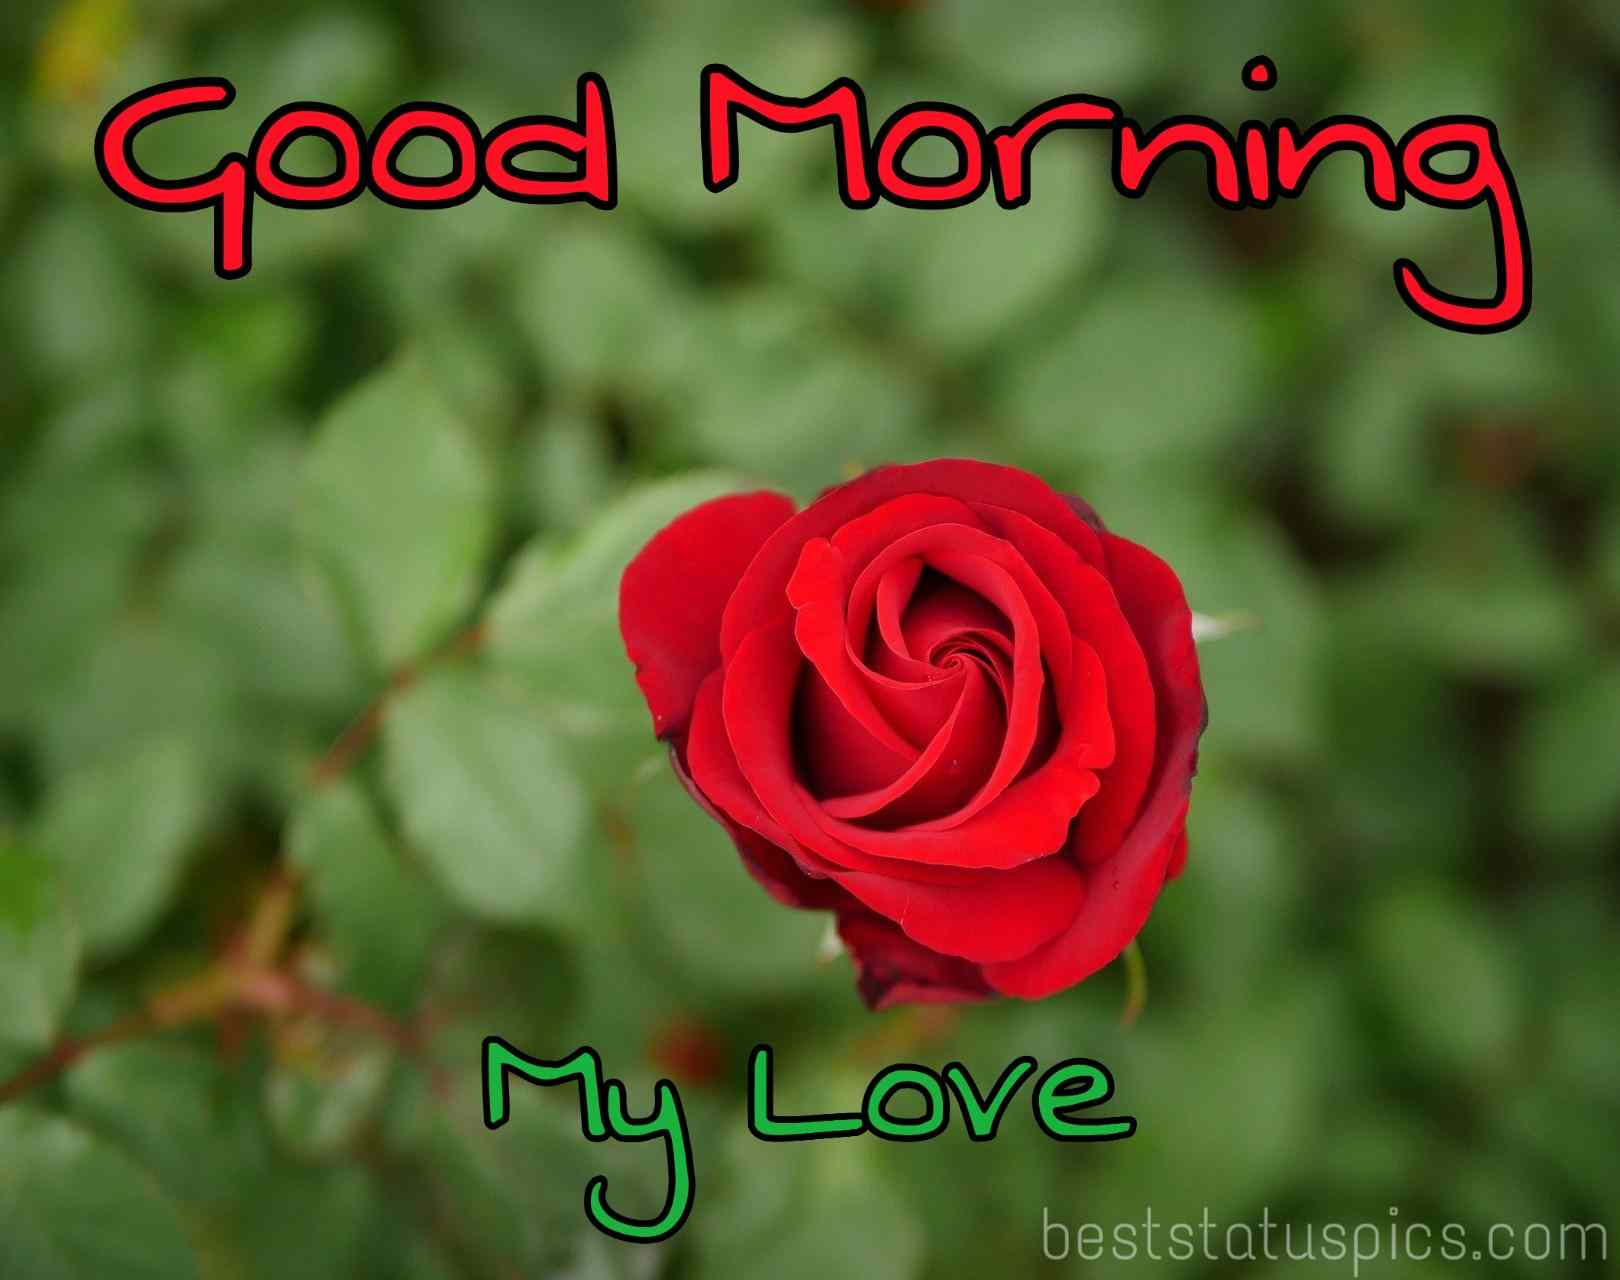 Good morning my love images with red rose for boyfriend and girlfriend